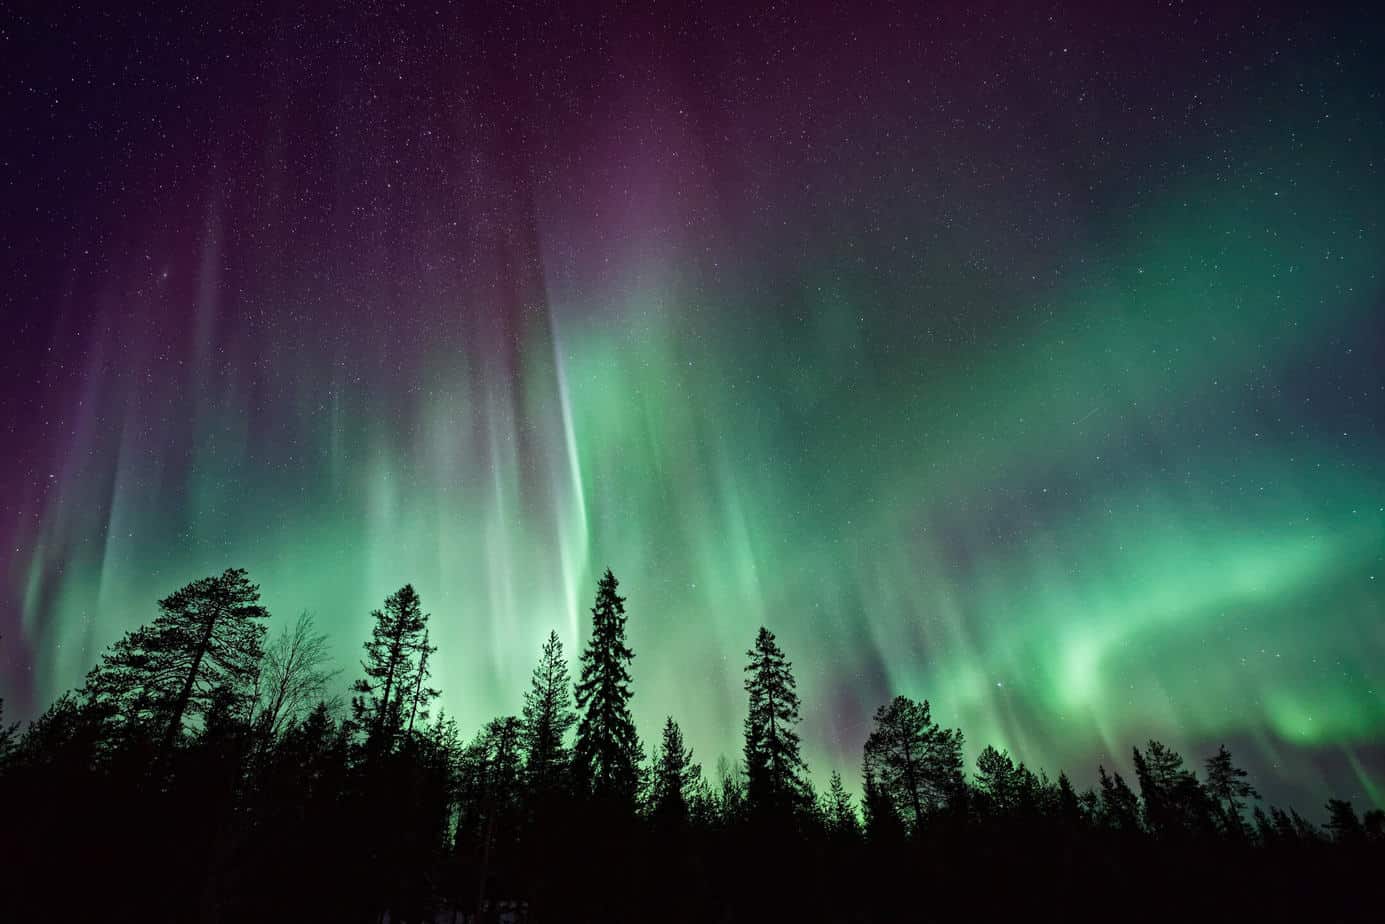 The northern lights above fir trees